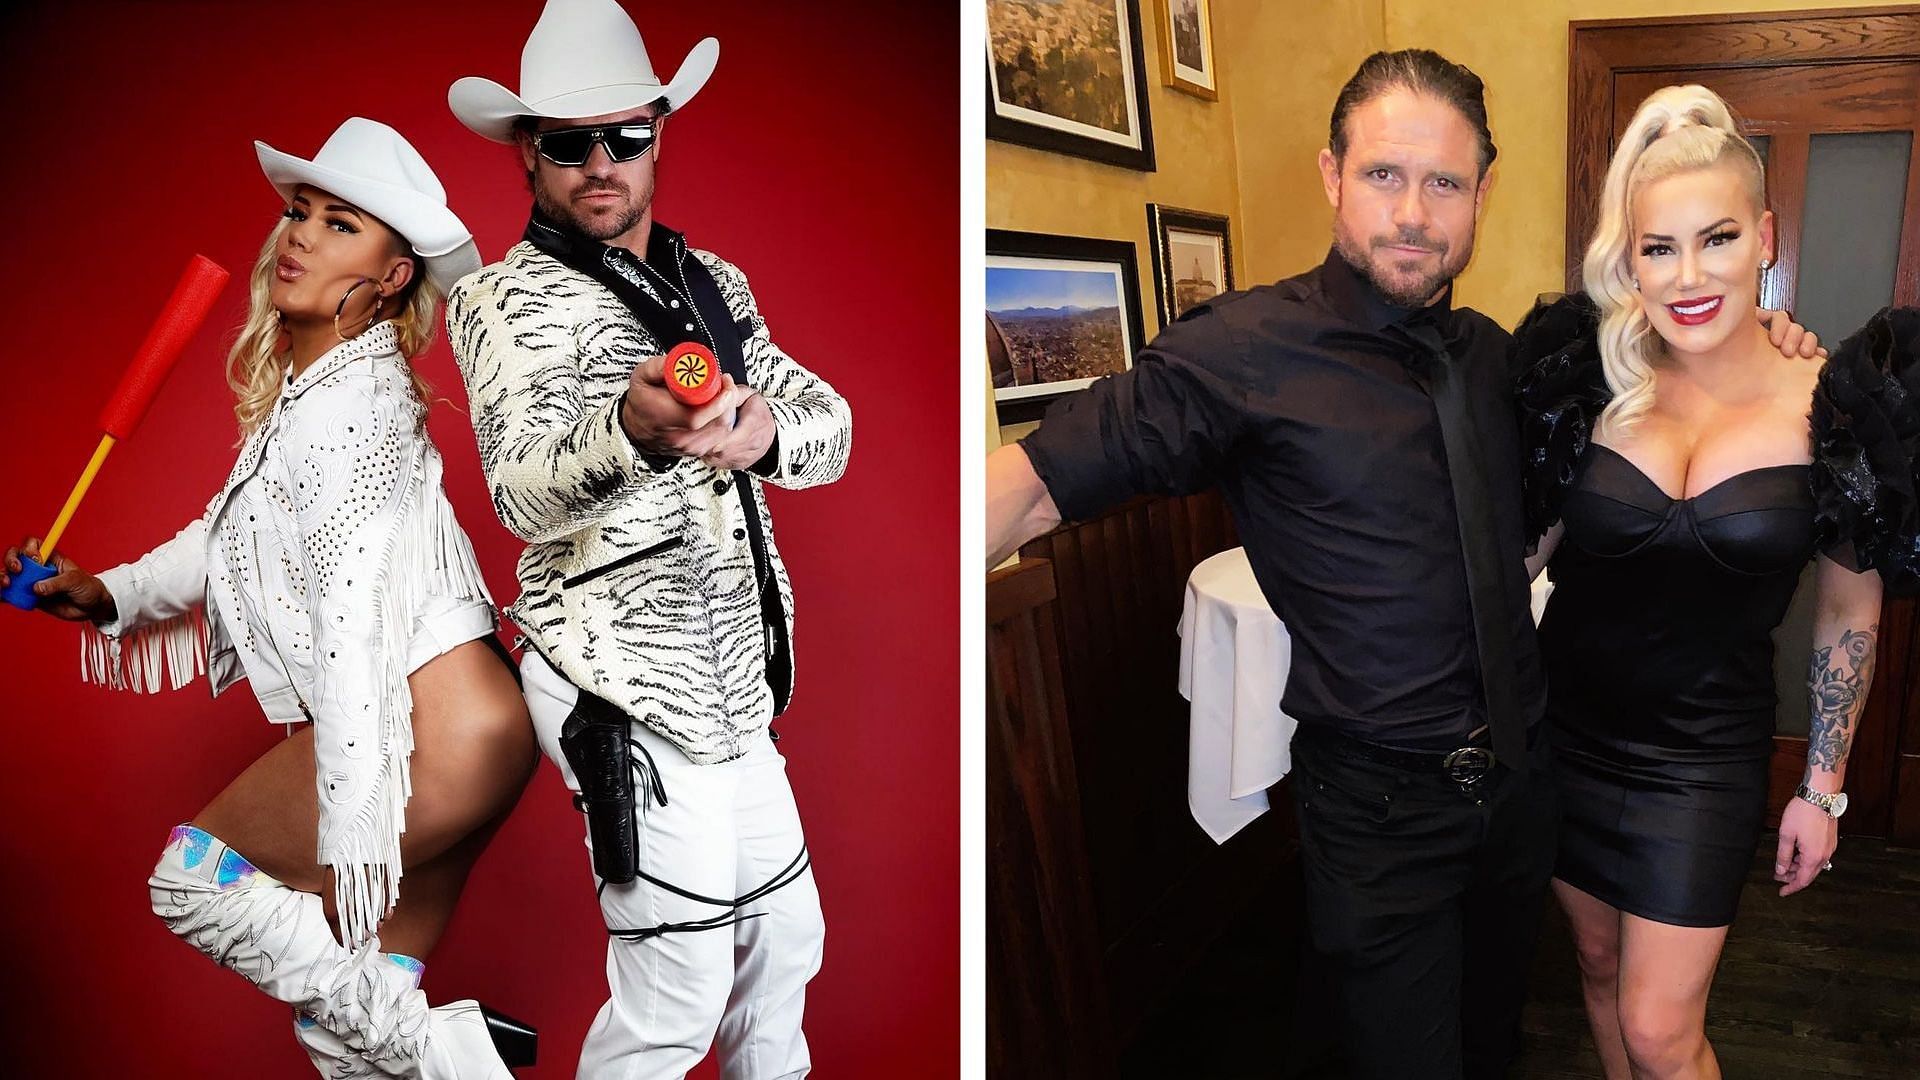 John Morrison and Franky Monet have several intriguing opponents if they return to WWE